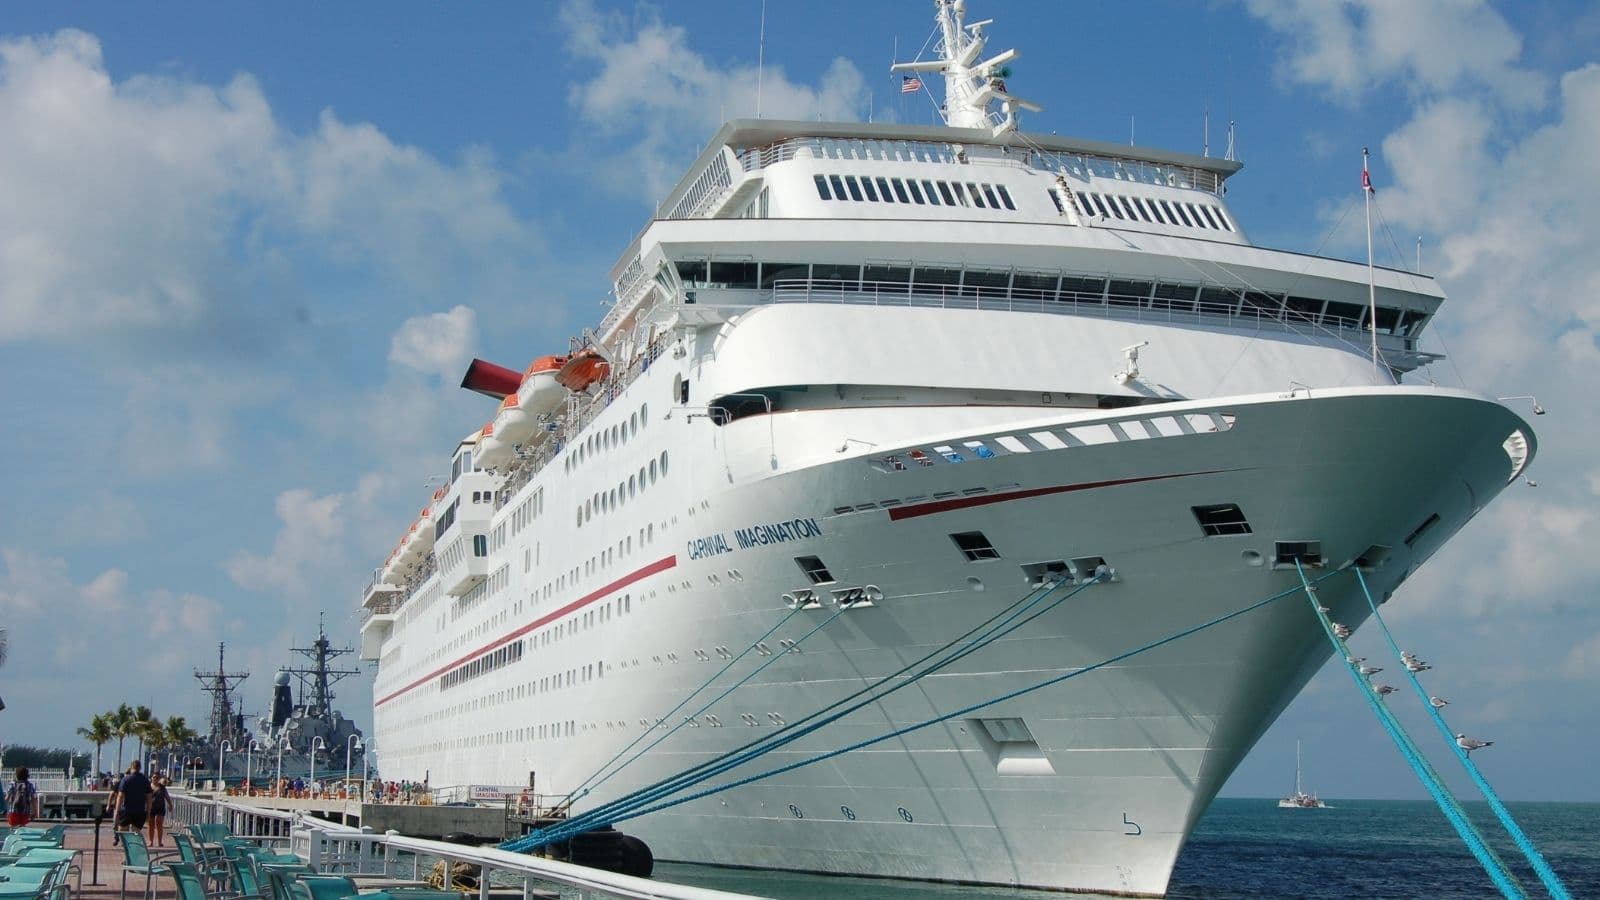 Buenos Aires Cruise Port to city center transfer